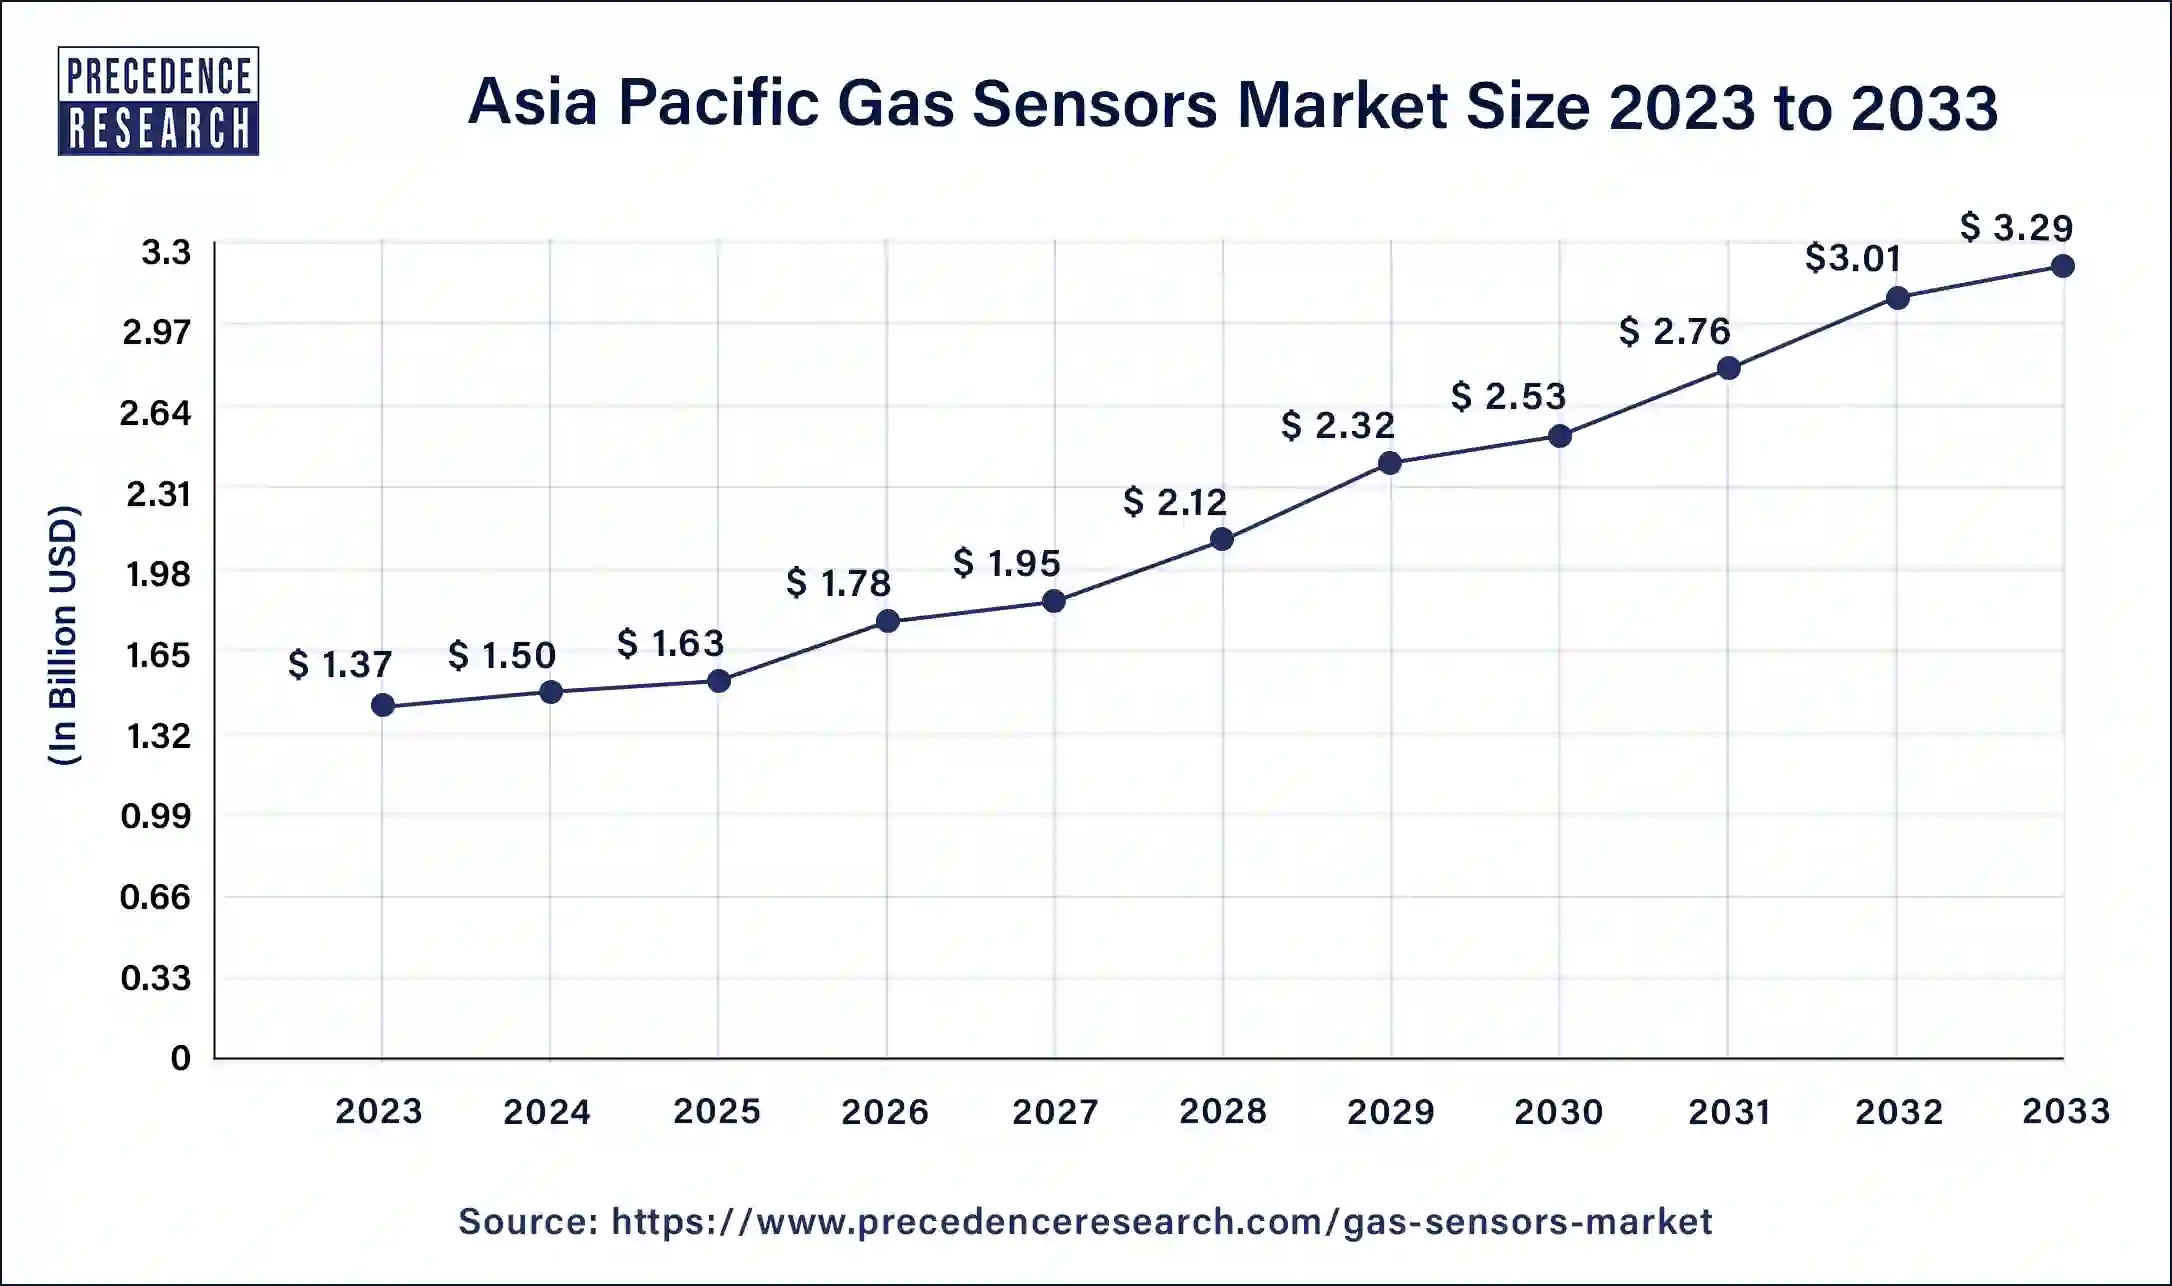 Asia Pacific Gas Sensors Market Size 2024 to 2033